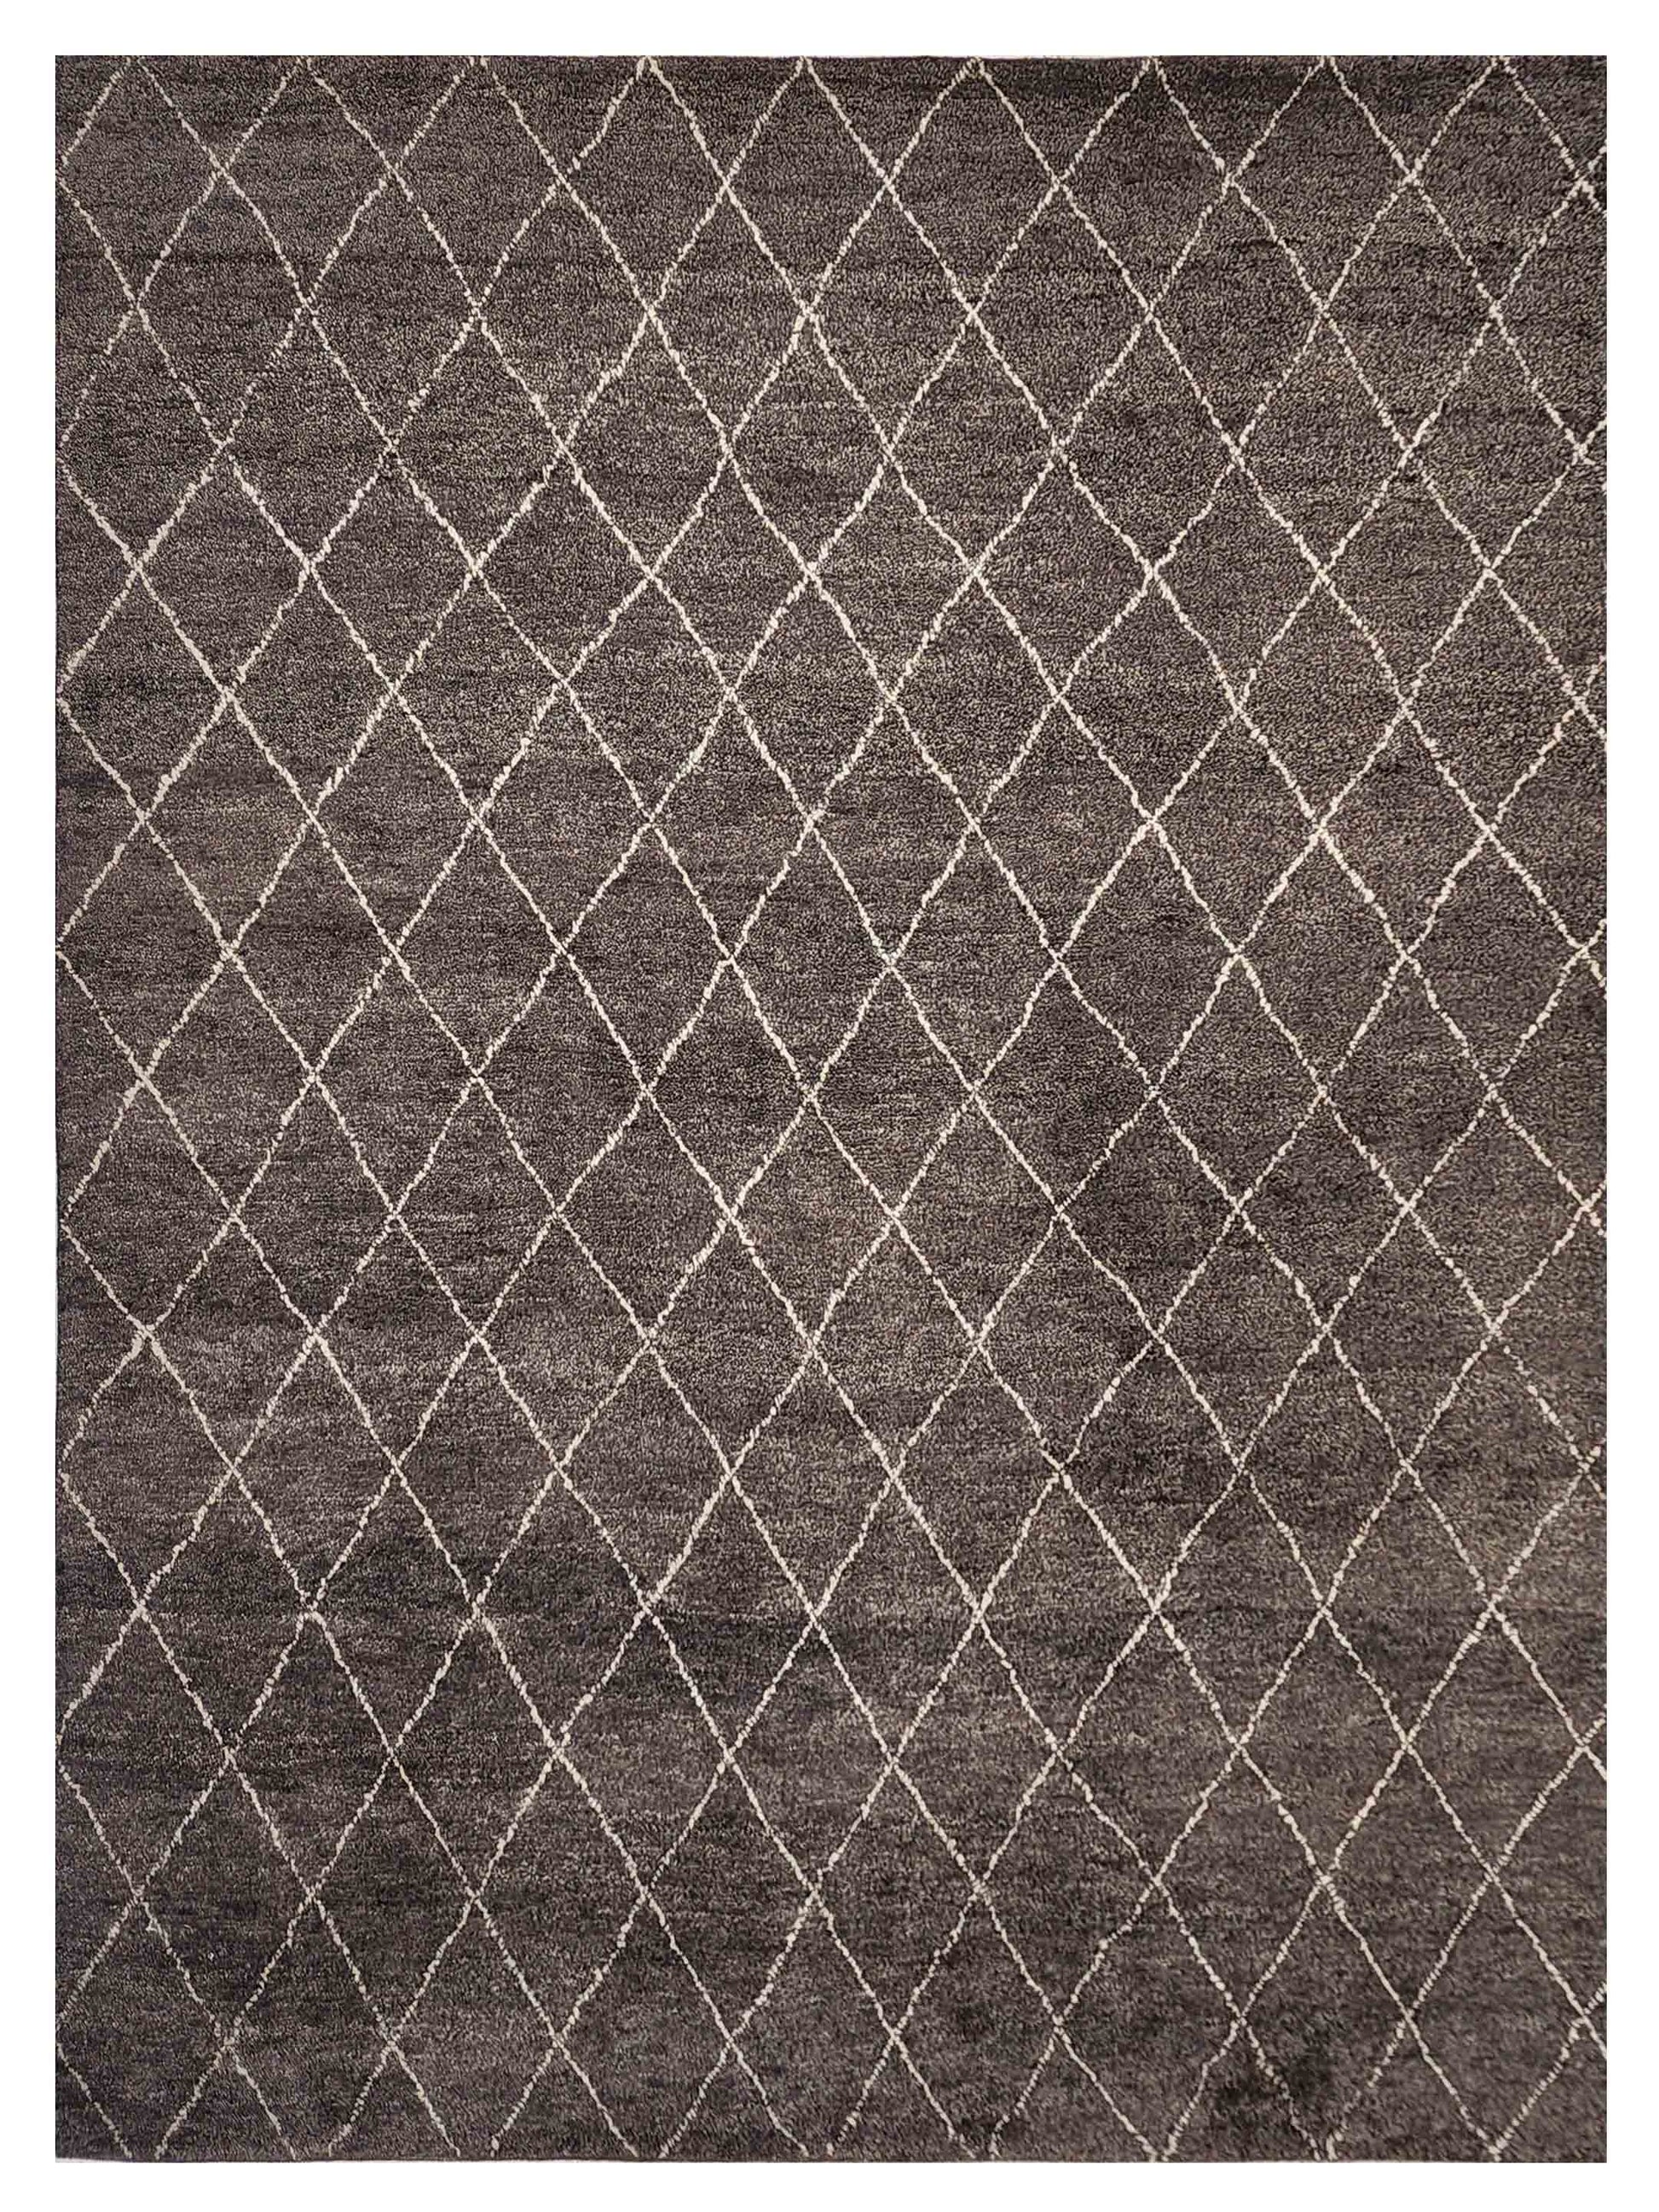 Artisan Marion MO-218 Chocolate Transitional Knotted Rug